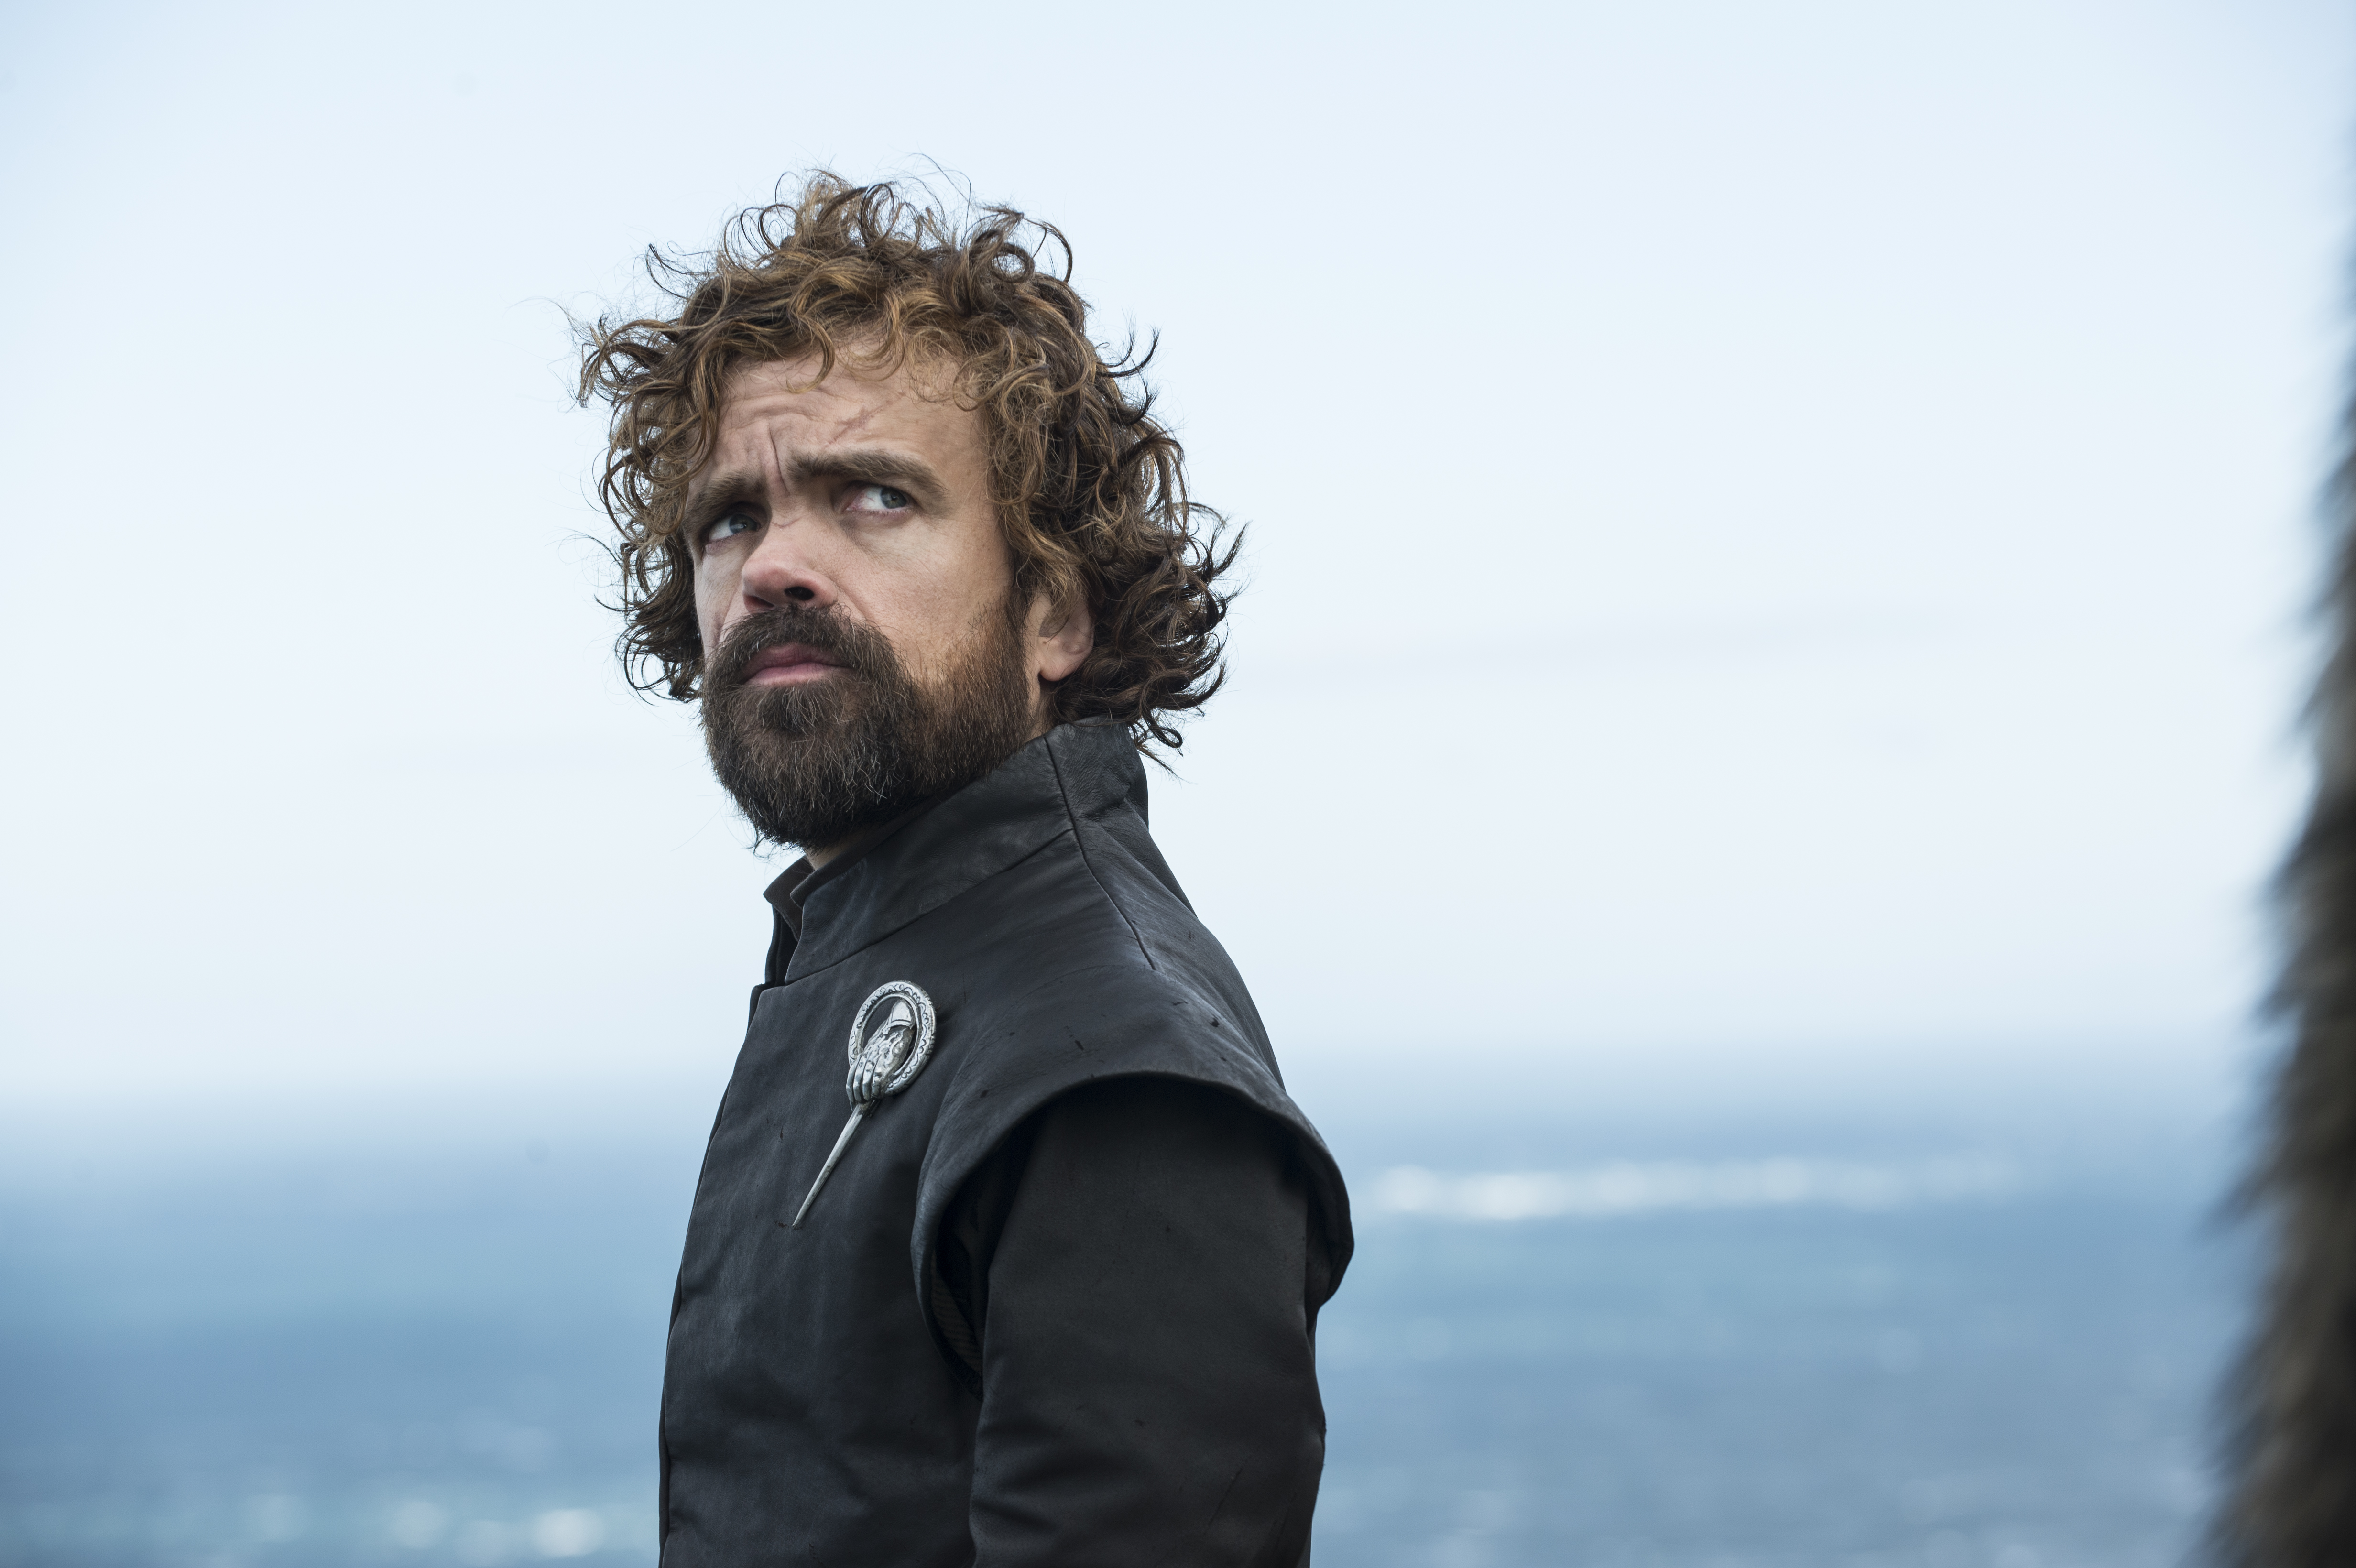 Game Of Thrones Peter Dinklage Tyrion Lannister 4928x3280